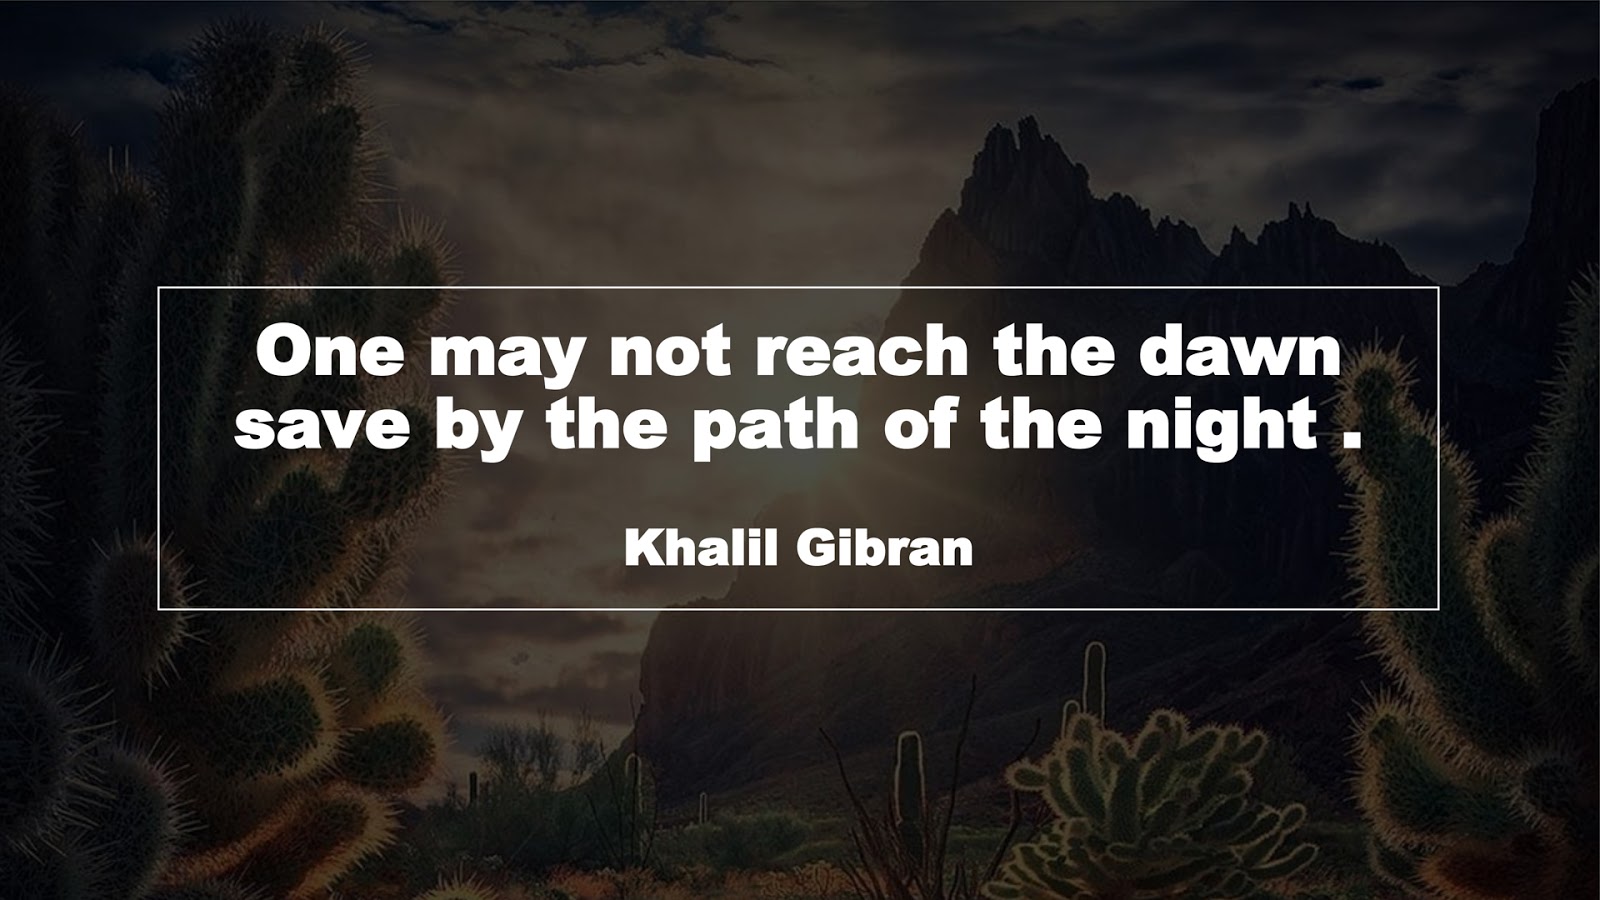 One may not reach the dawn save by the path of the night . (Khalil Gibran)